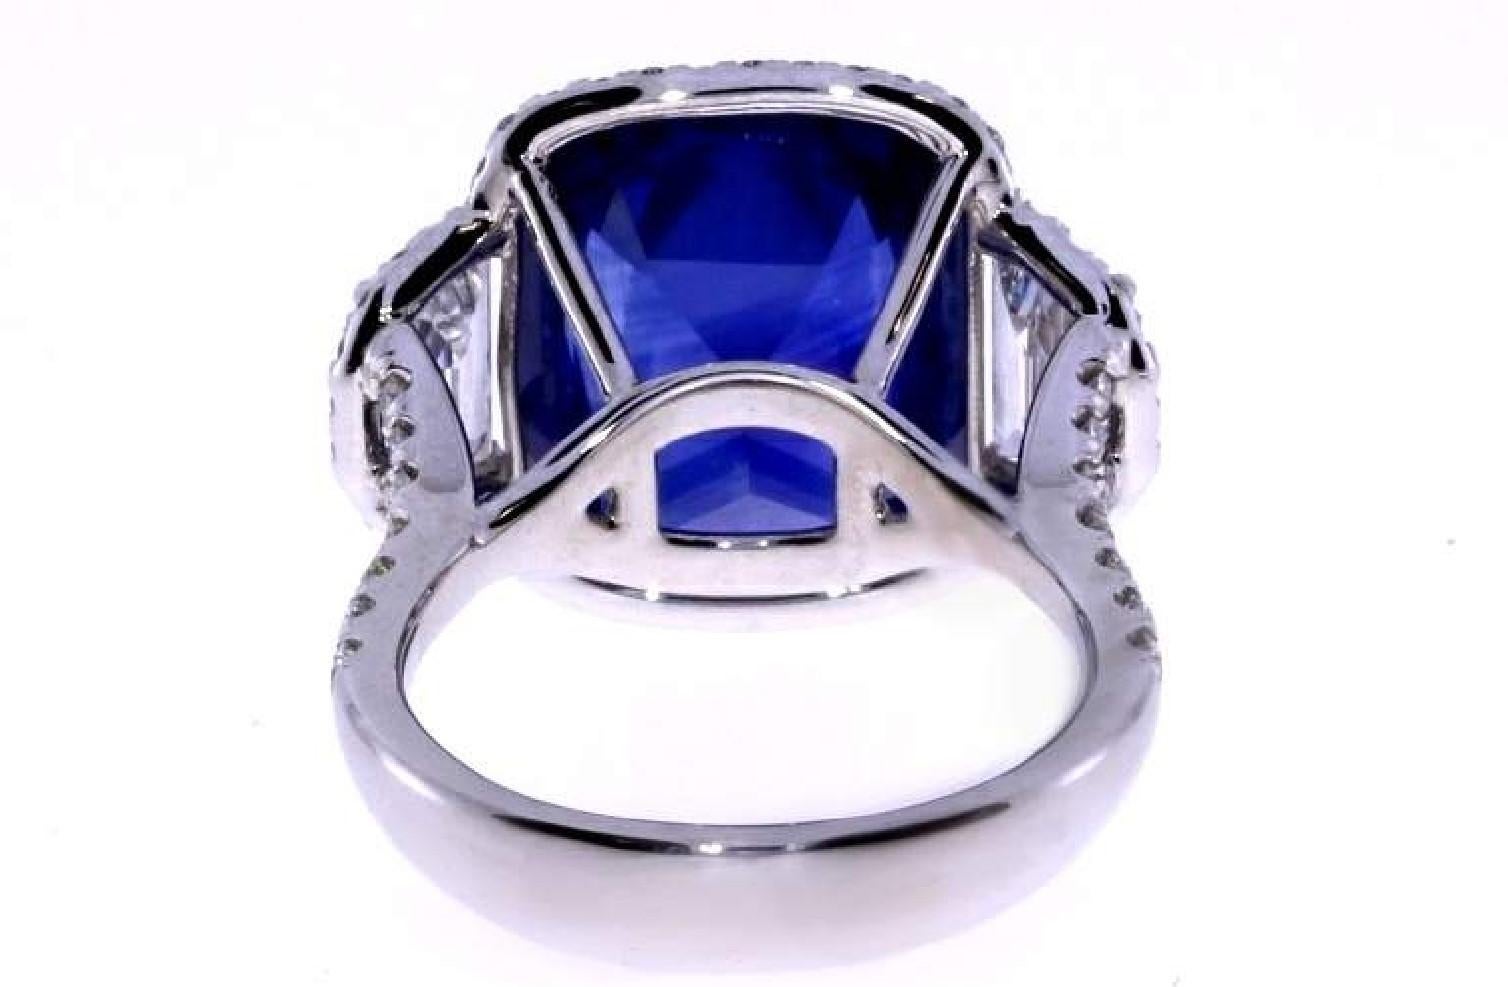 Handmade
Platinum 
GIA Certified Cushion Cut Natural Blue Sapphire is 11.04ct 
1.75ct Total Diamond Weight
Designed, Handpicked, & Manufactured From Scratch In Los Angeles Using Only The Finest Materials and Workmanship